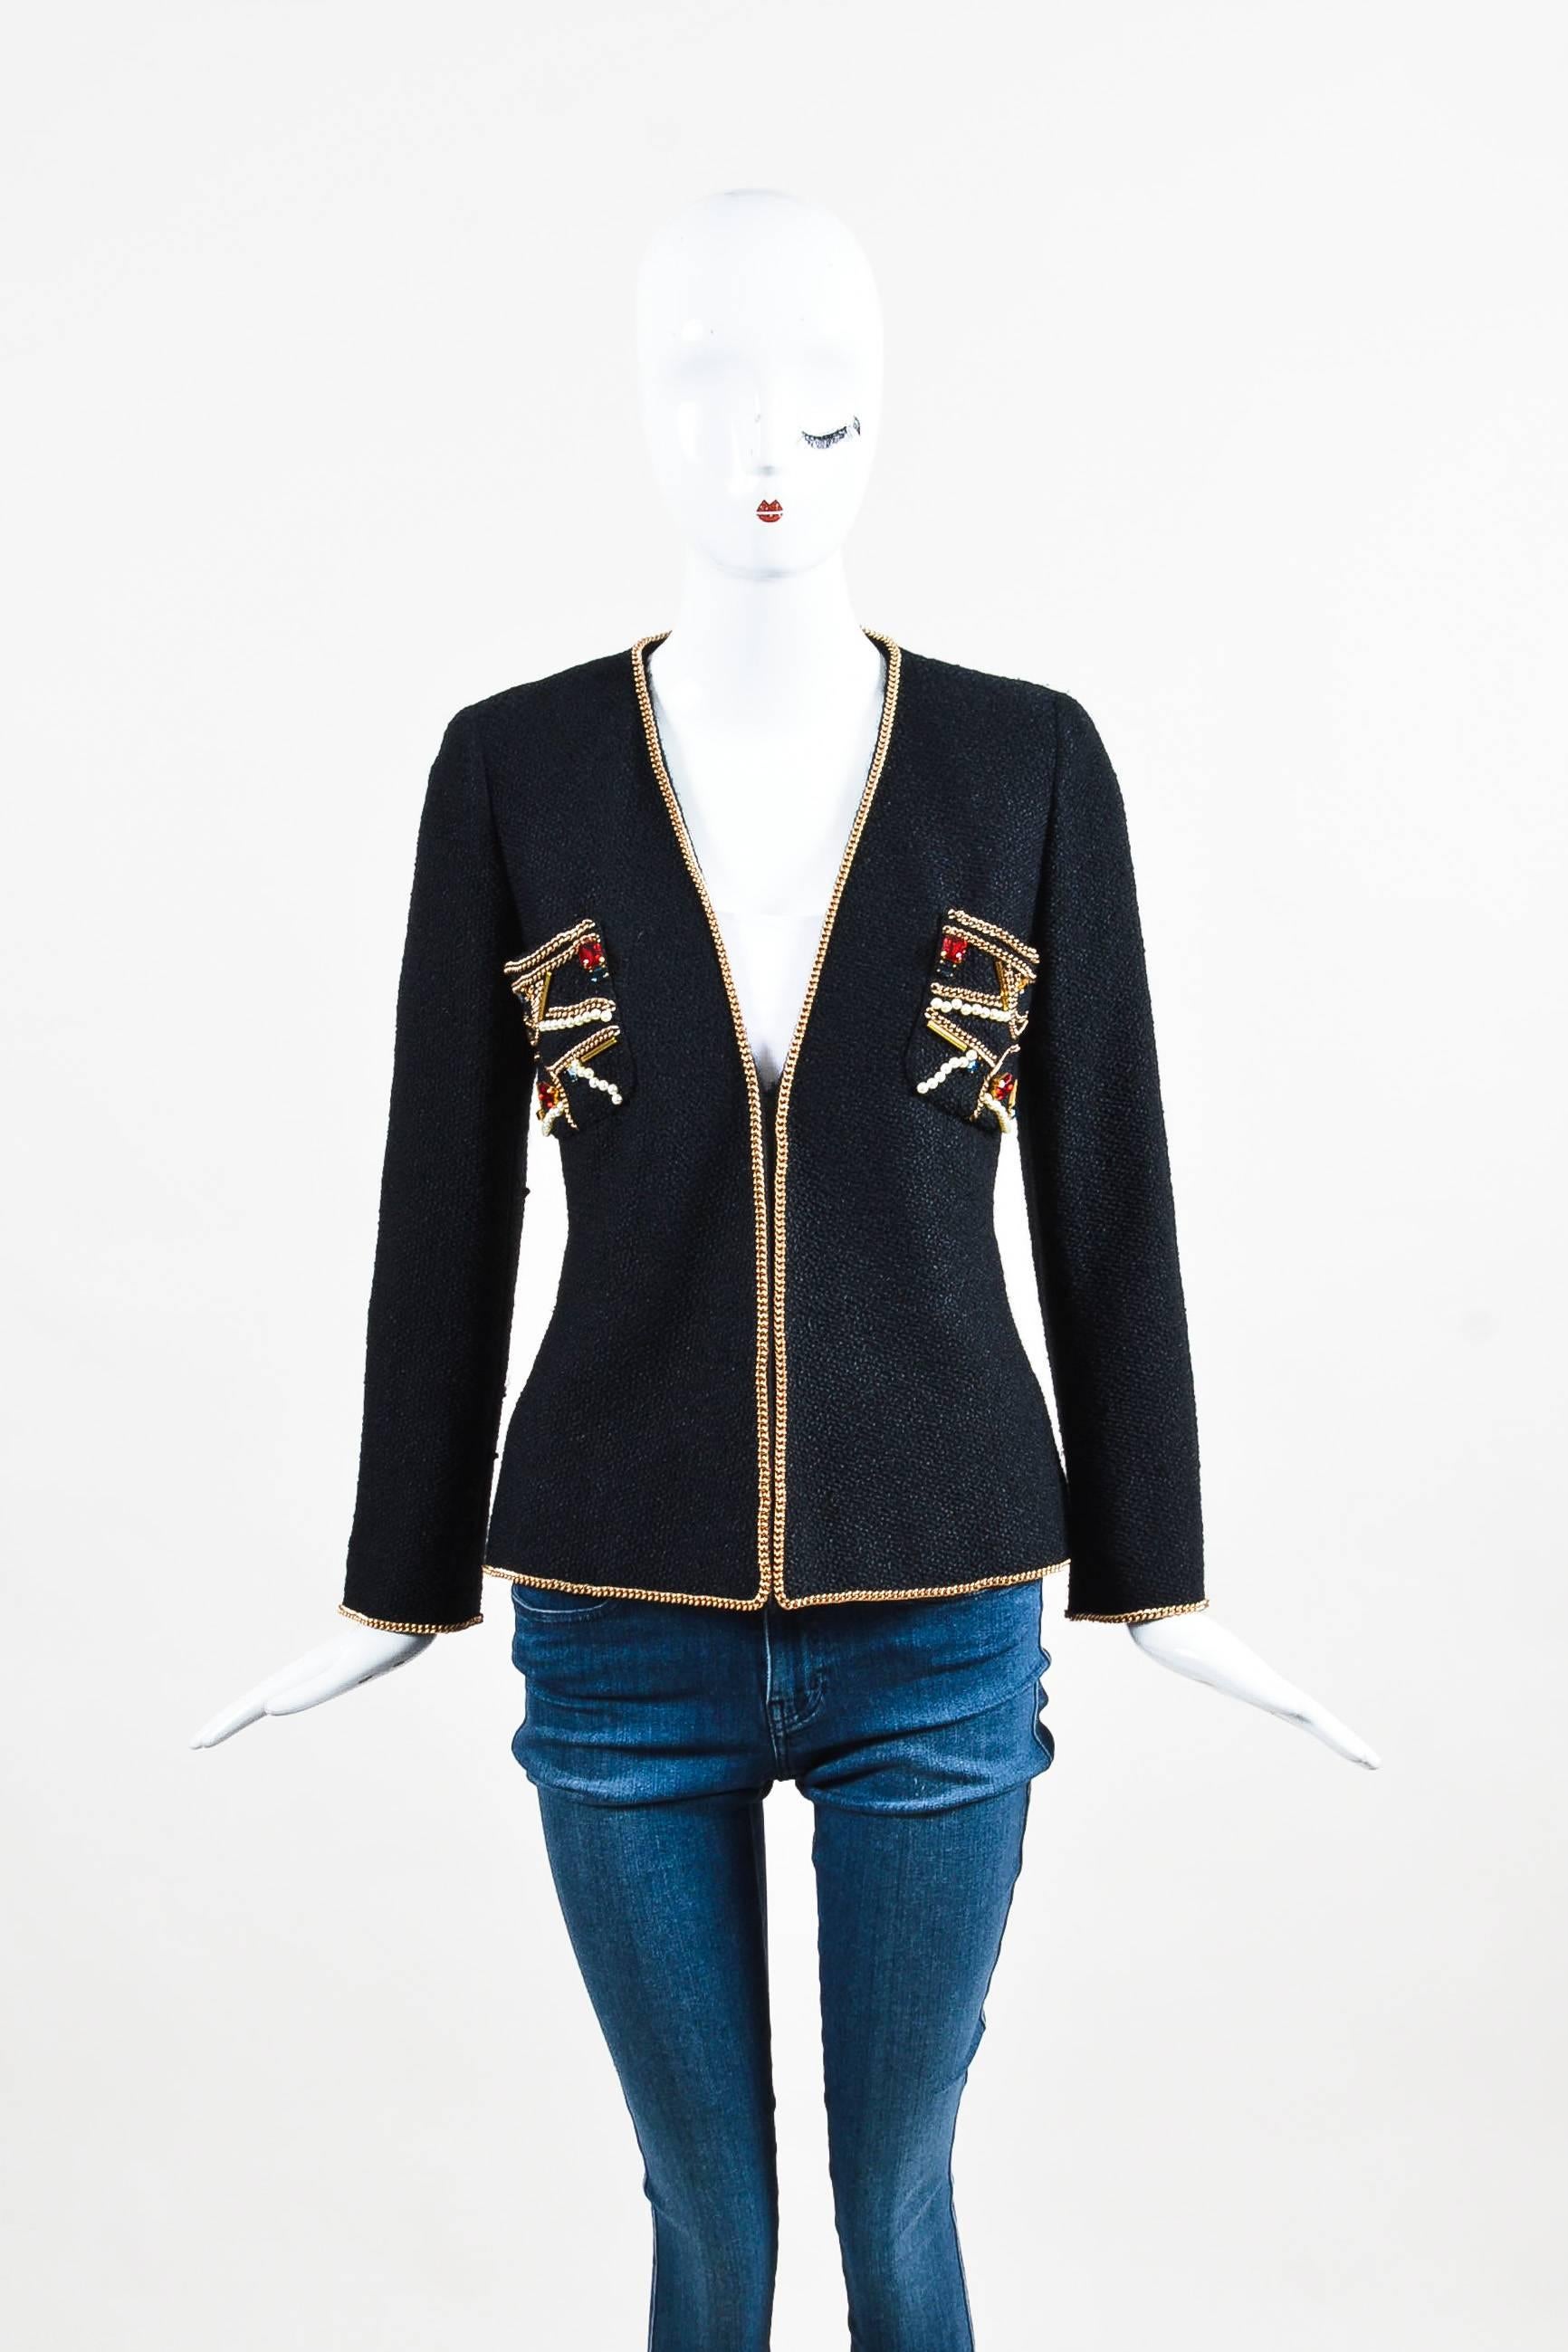 This elegant and classic jacket by Chanel that is the perfect addition to any wardrobe. Black tweed material with embellishments at the front. Chain trims with faux pearls and gems in red nad blue hues. Single hook-and-eye closure at the front with